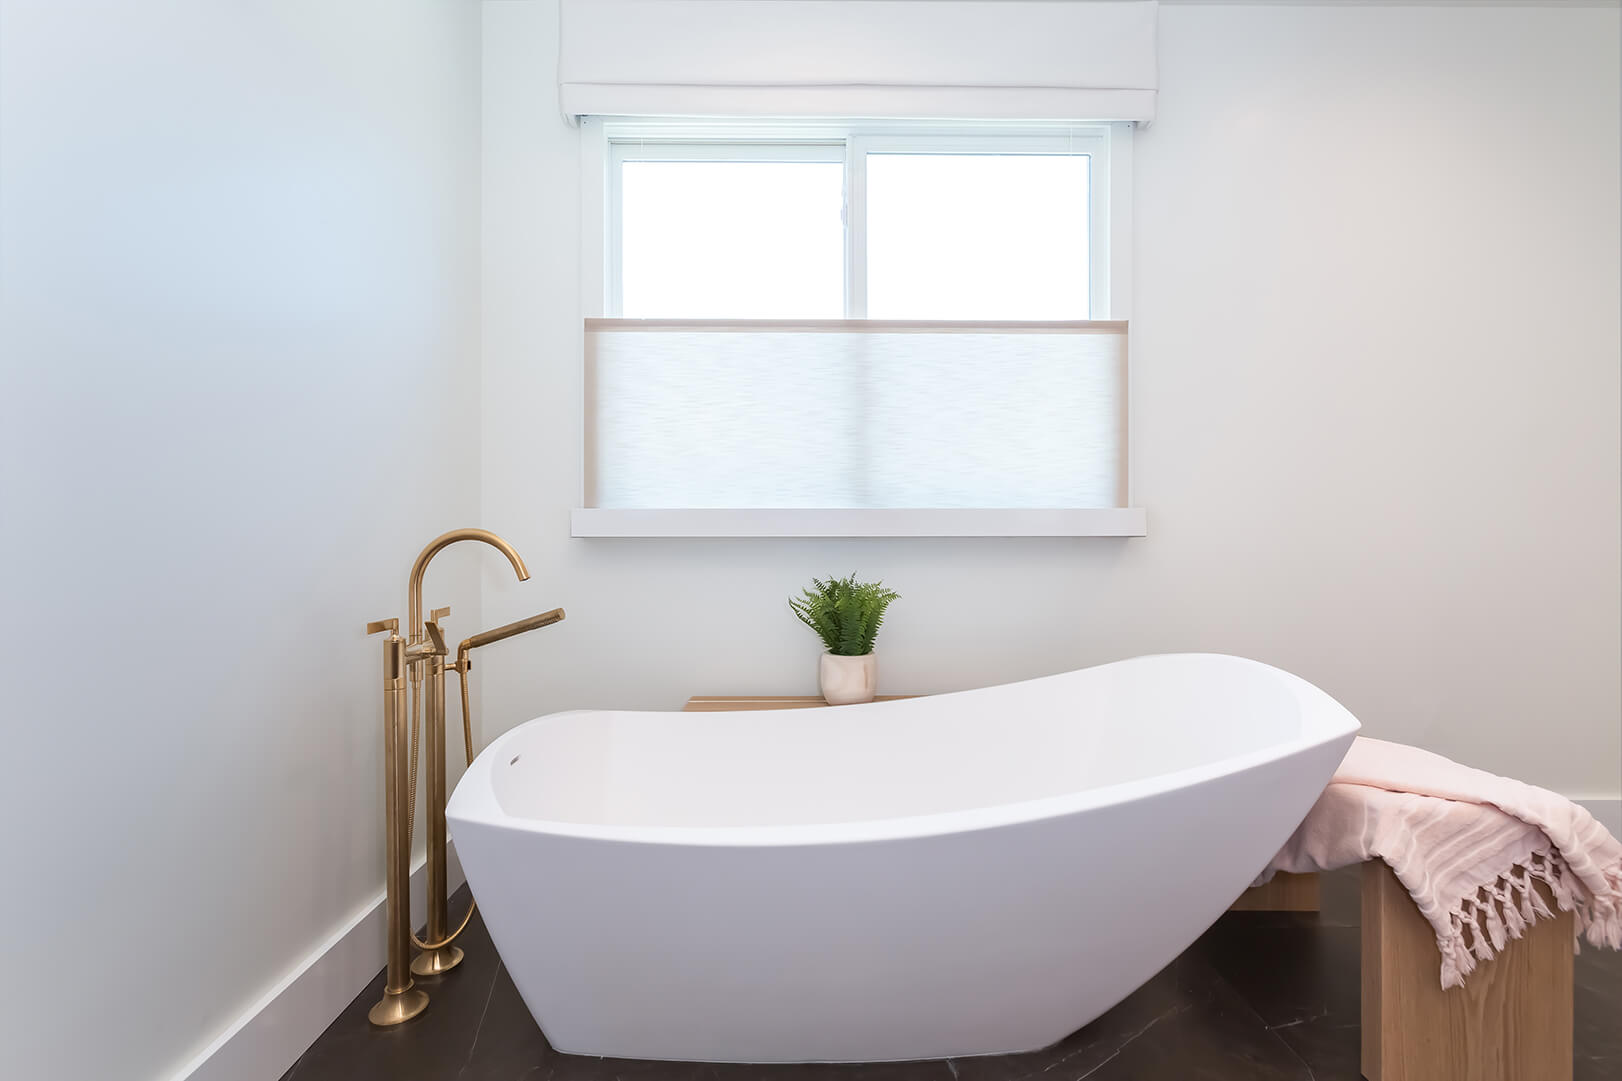 Hastings-Tile-Bath-60-inch-Chelsea-Tub-PHOTO-BY-HILLARY-CAMPBELL-4